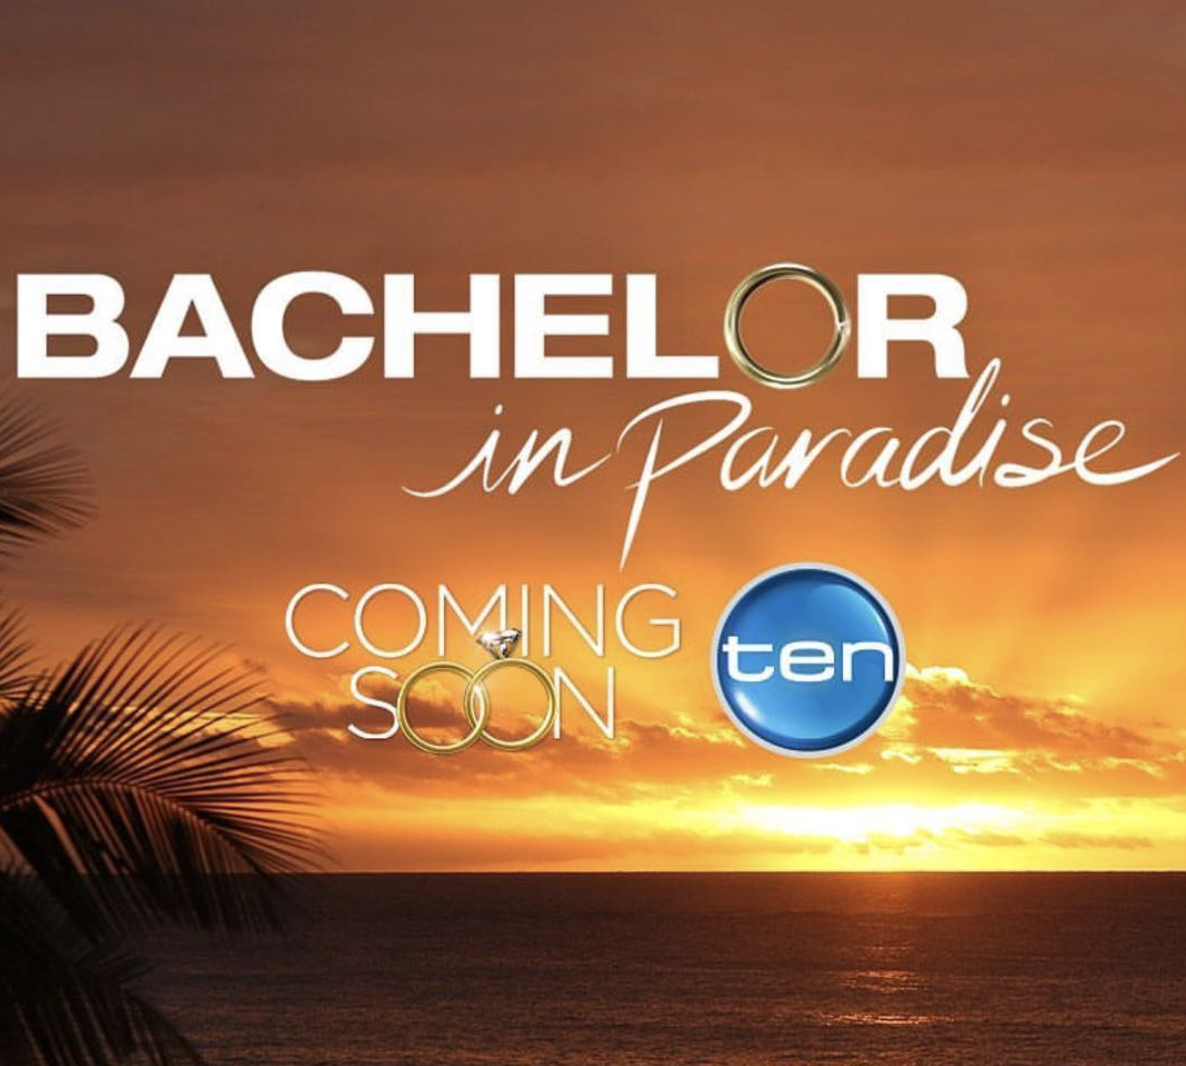 Australia, Bachelor In Paradise is coming